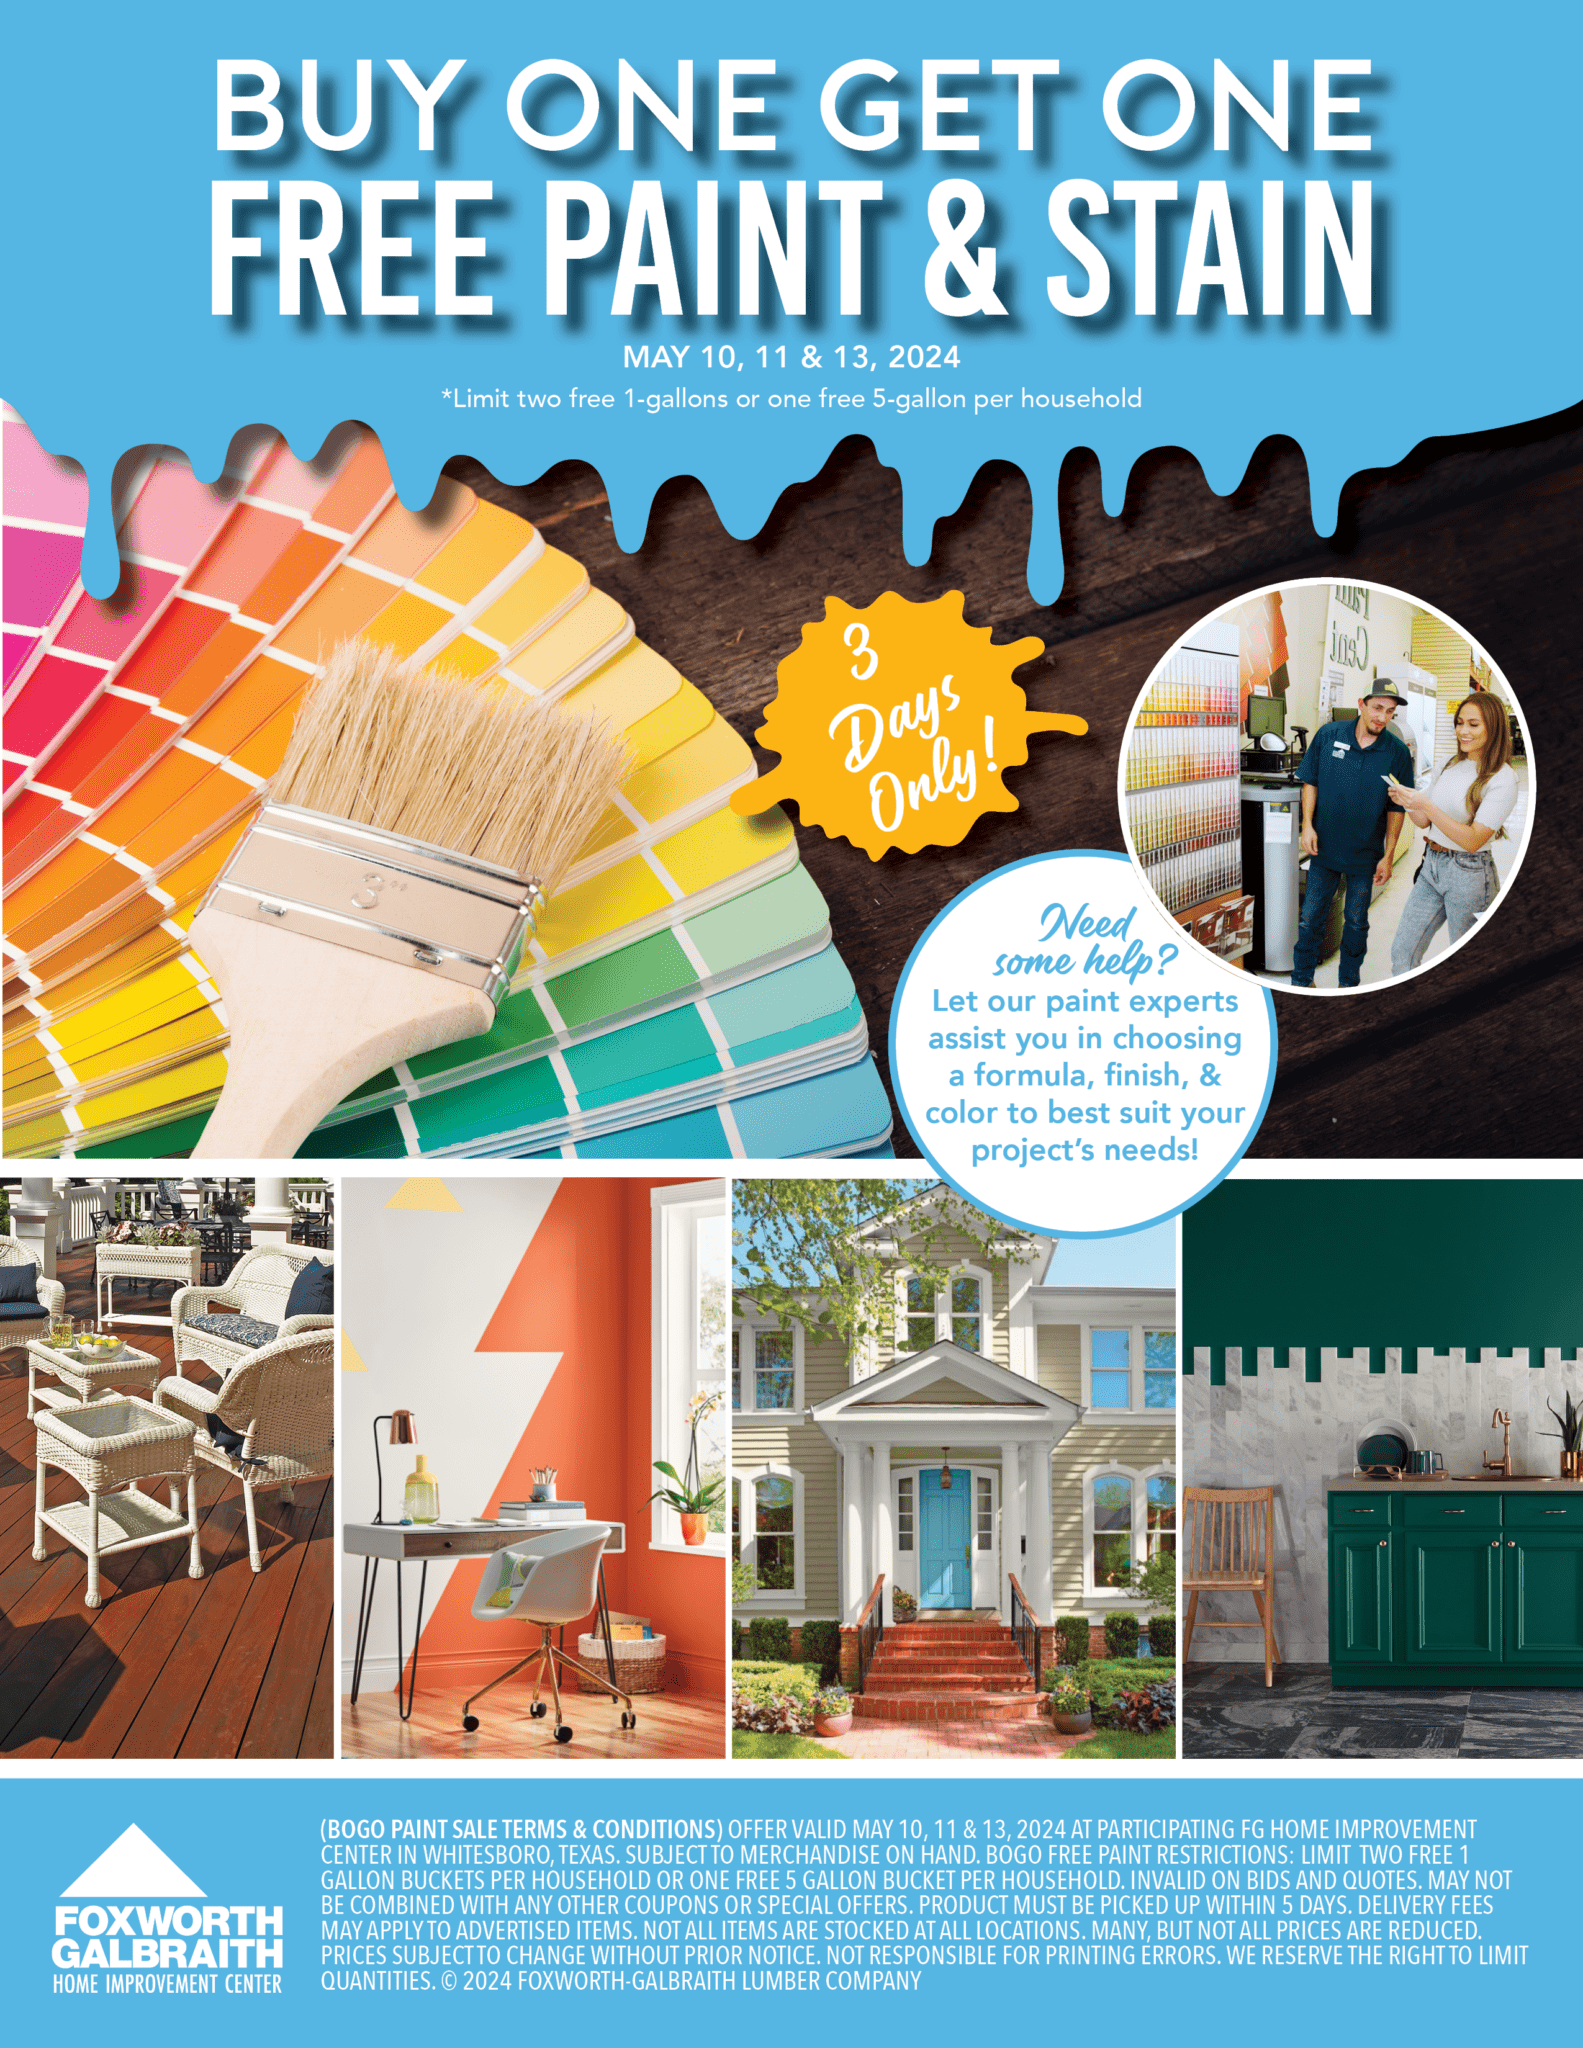 BOGO Free Paint & Stain May 10-13